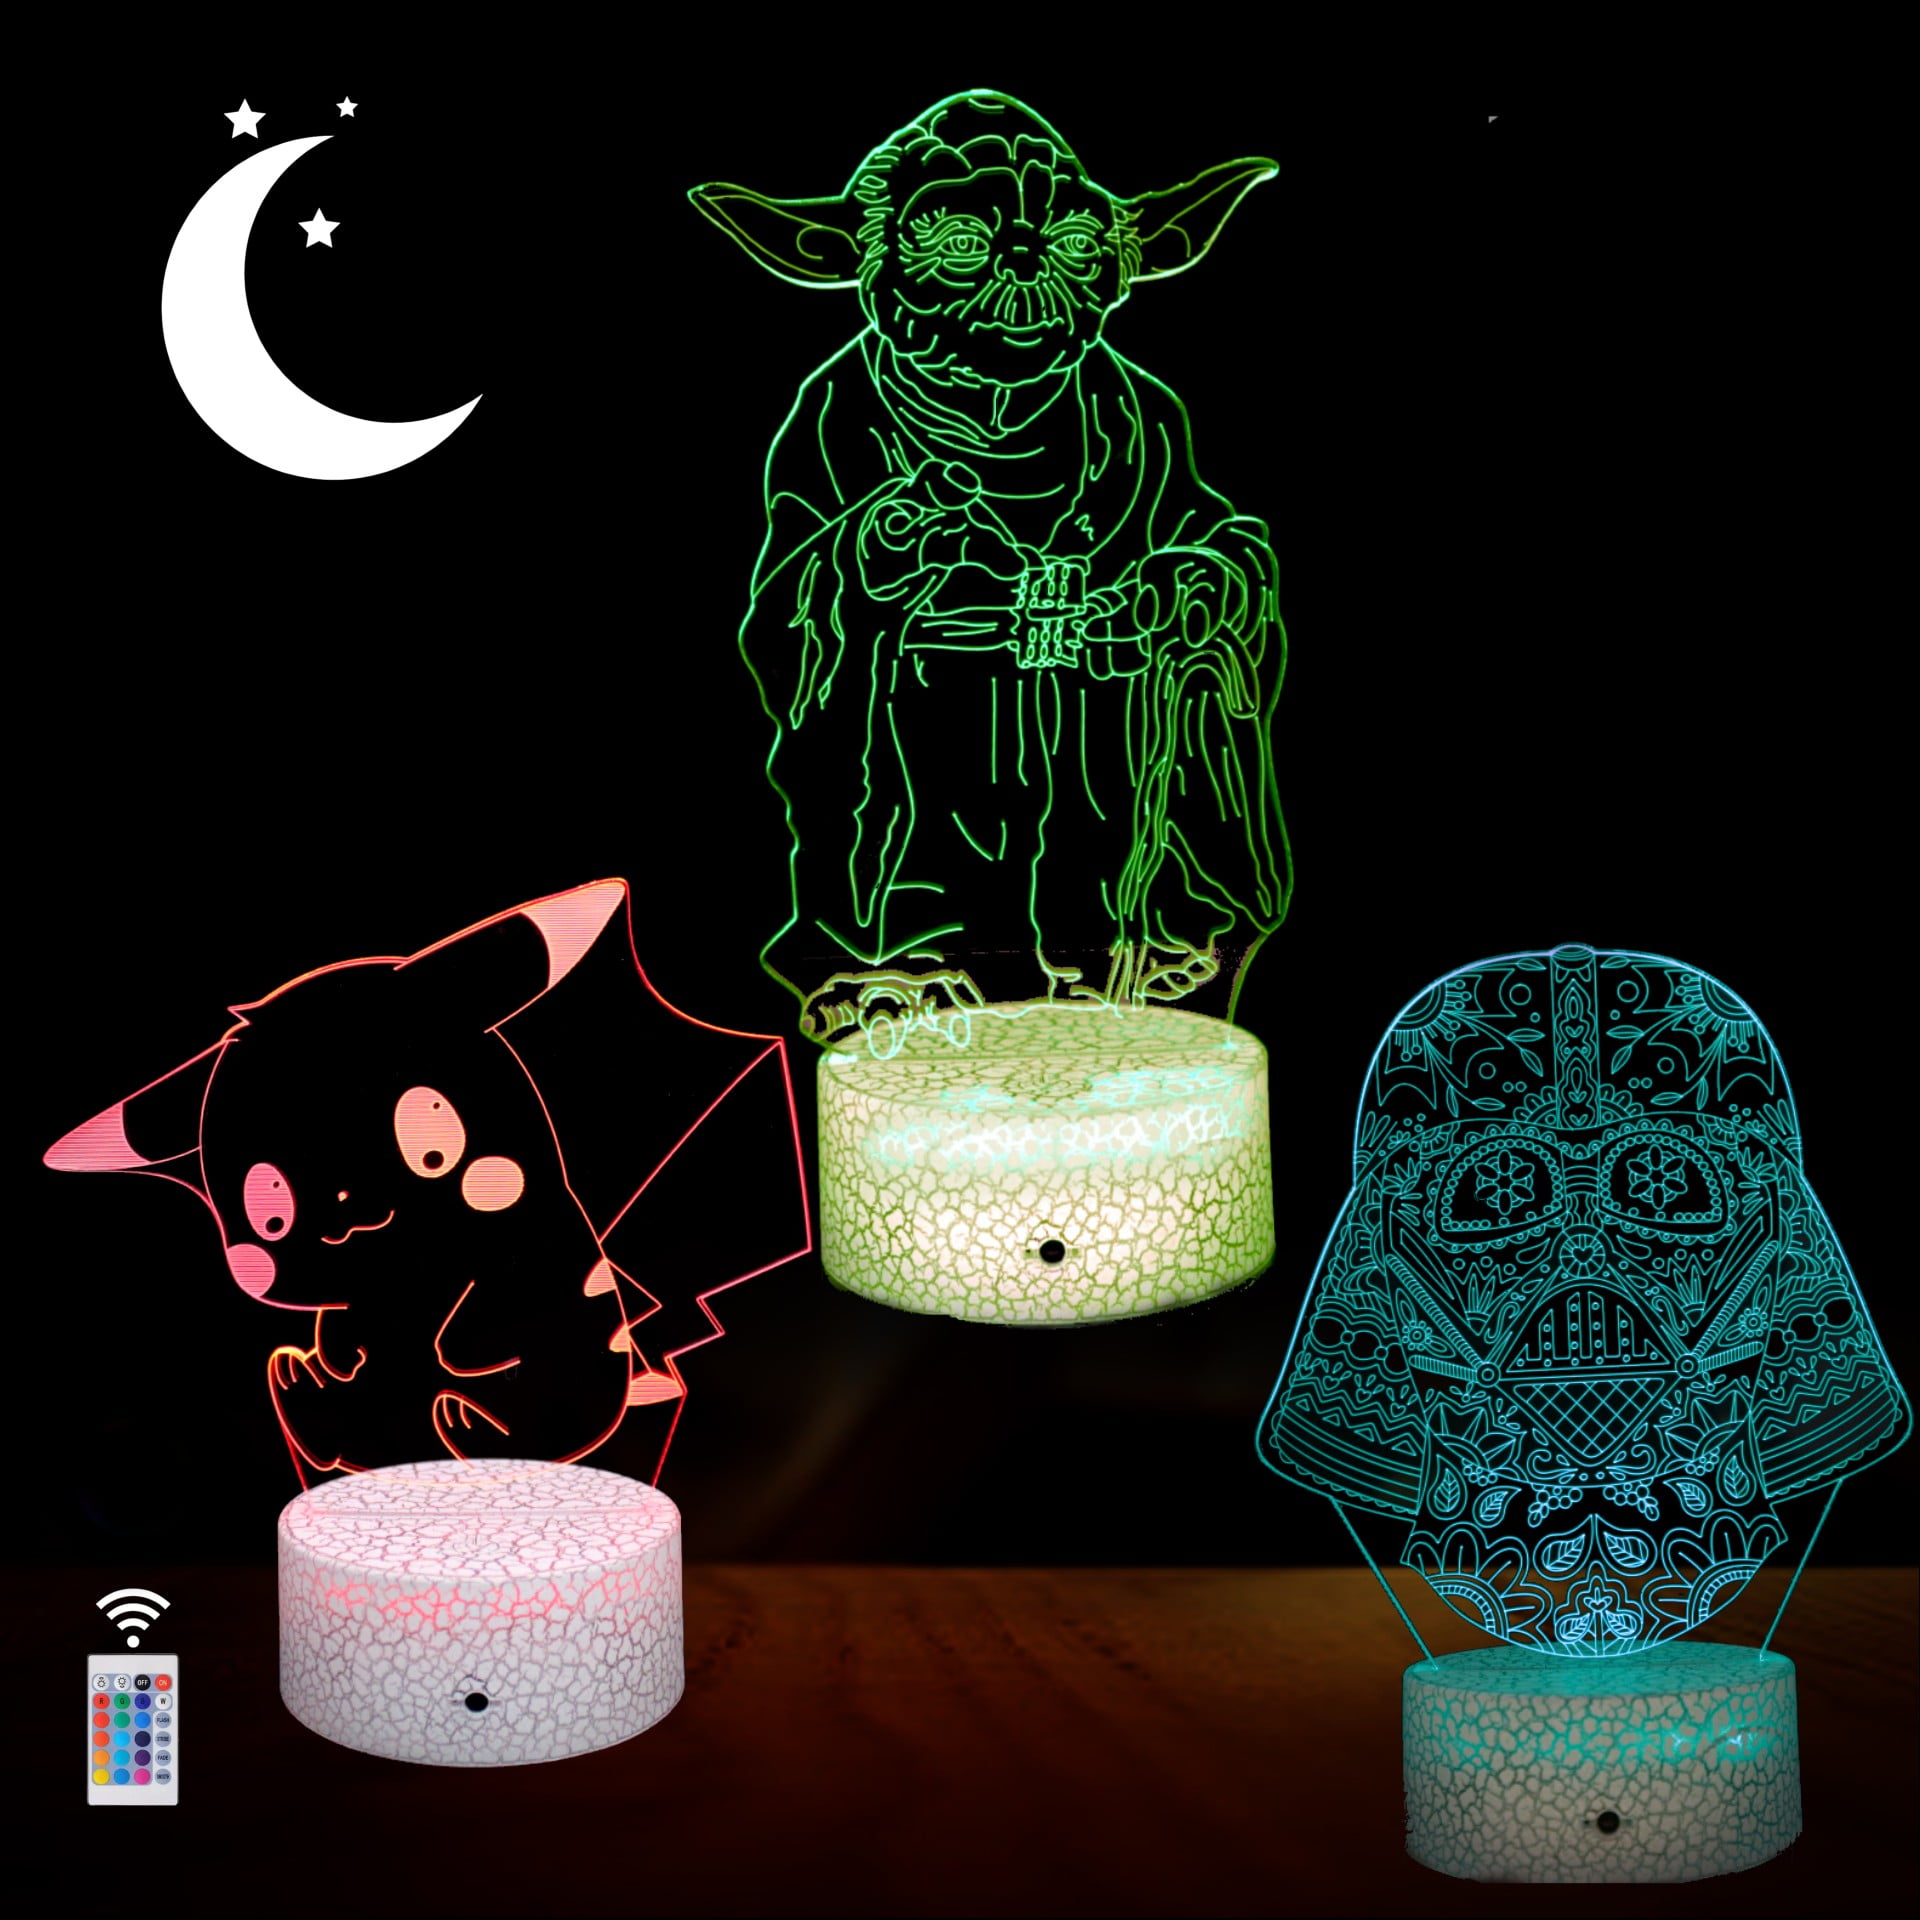 2 Bases 5 Patterns Star Wars Gifts 3D Illusion Lamp - Star Wars Toys Baby  Yoda Night Light ,7 Color …See more 2 Bases 5 Patterns Star Wars Gifts 3D